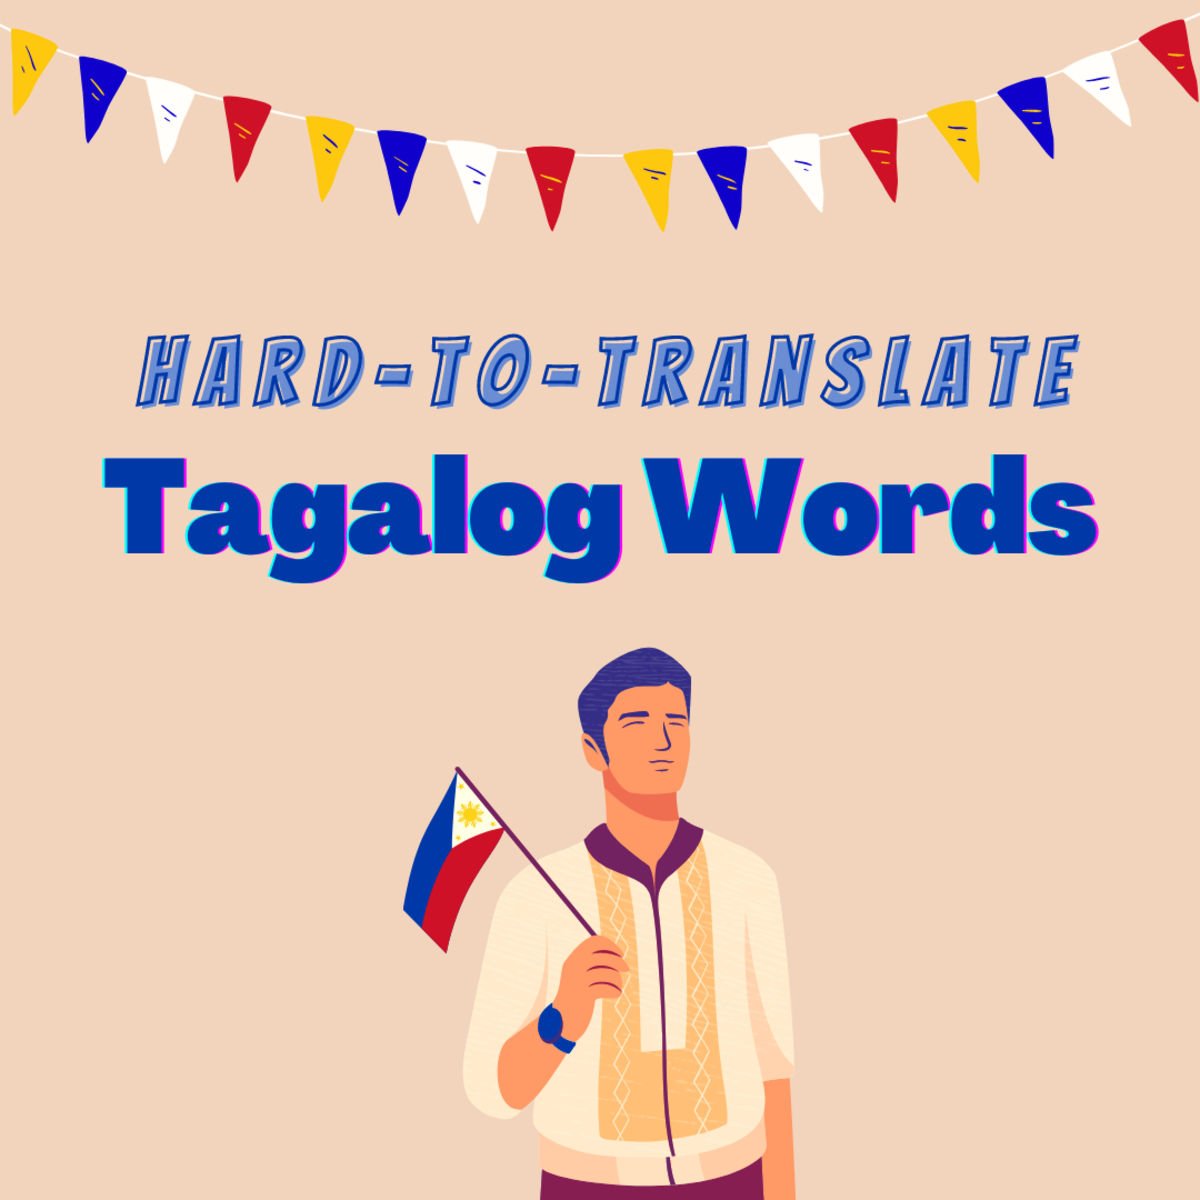 Read on to discover 17 weird, quirky Tagalog words that are difficult to translate into English!